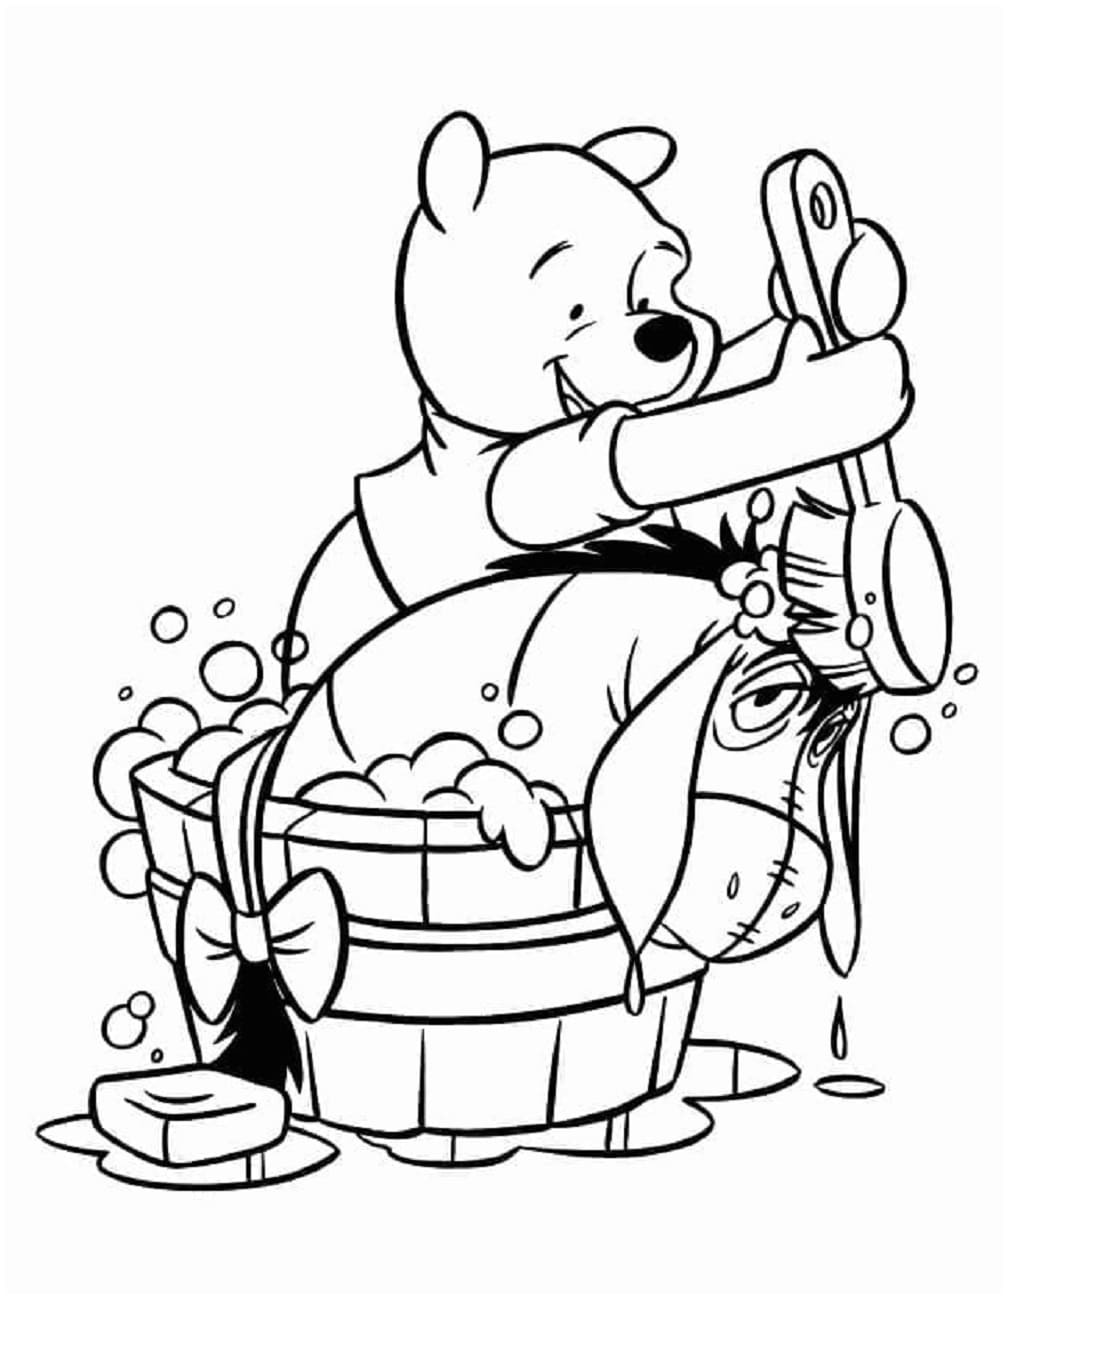 Printable Hygiene Free Coloring Page